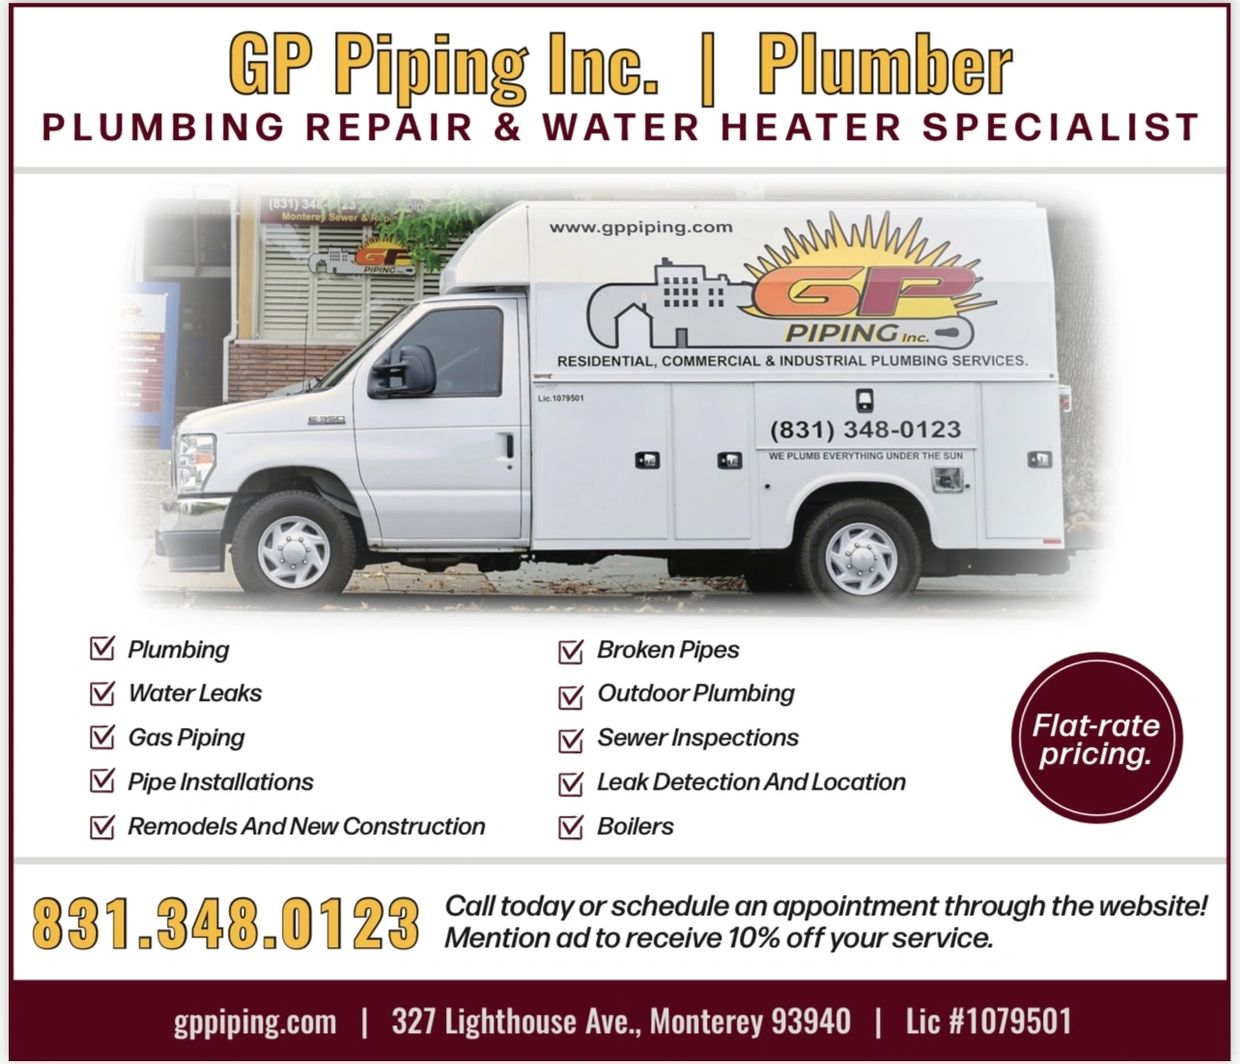 Plumbers Monterey, CA. Plumbing repair and water heater specialist. Carmel by the sea, CA. GP Piping